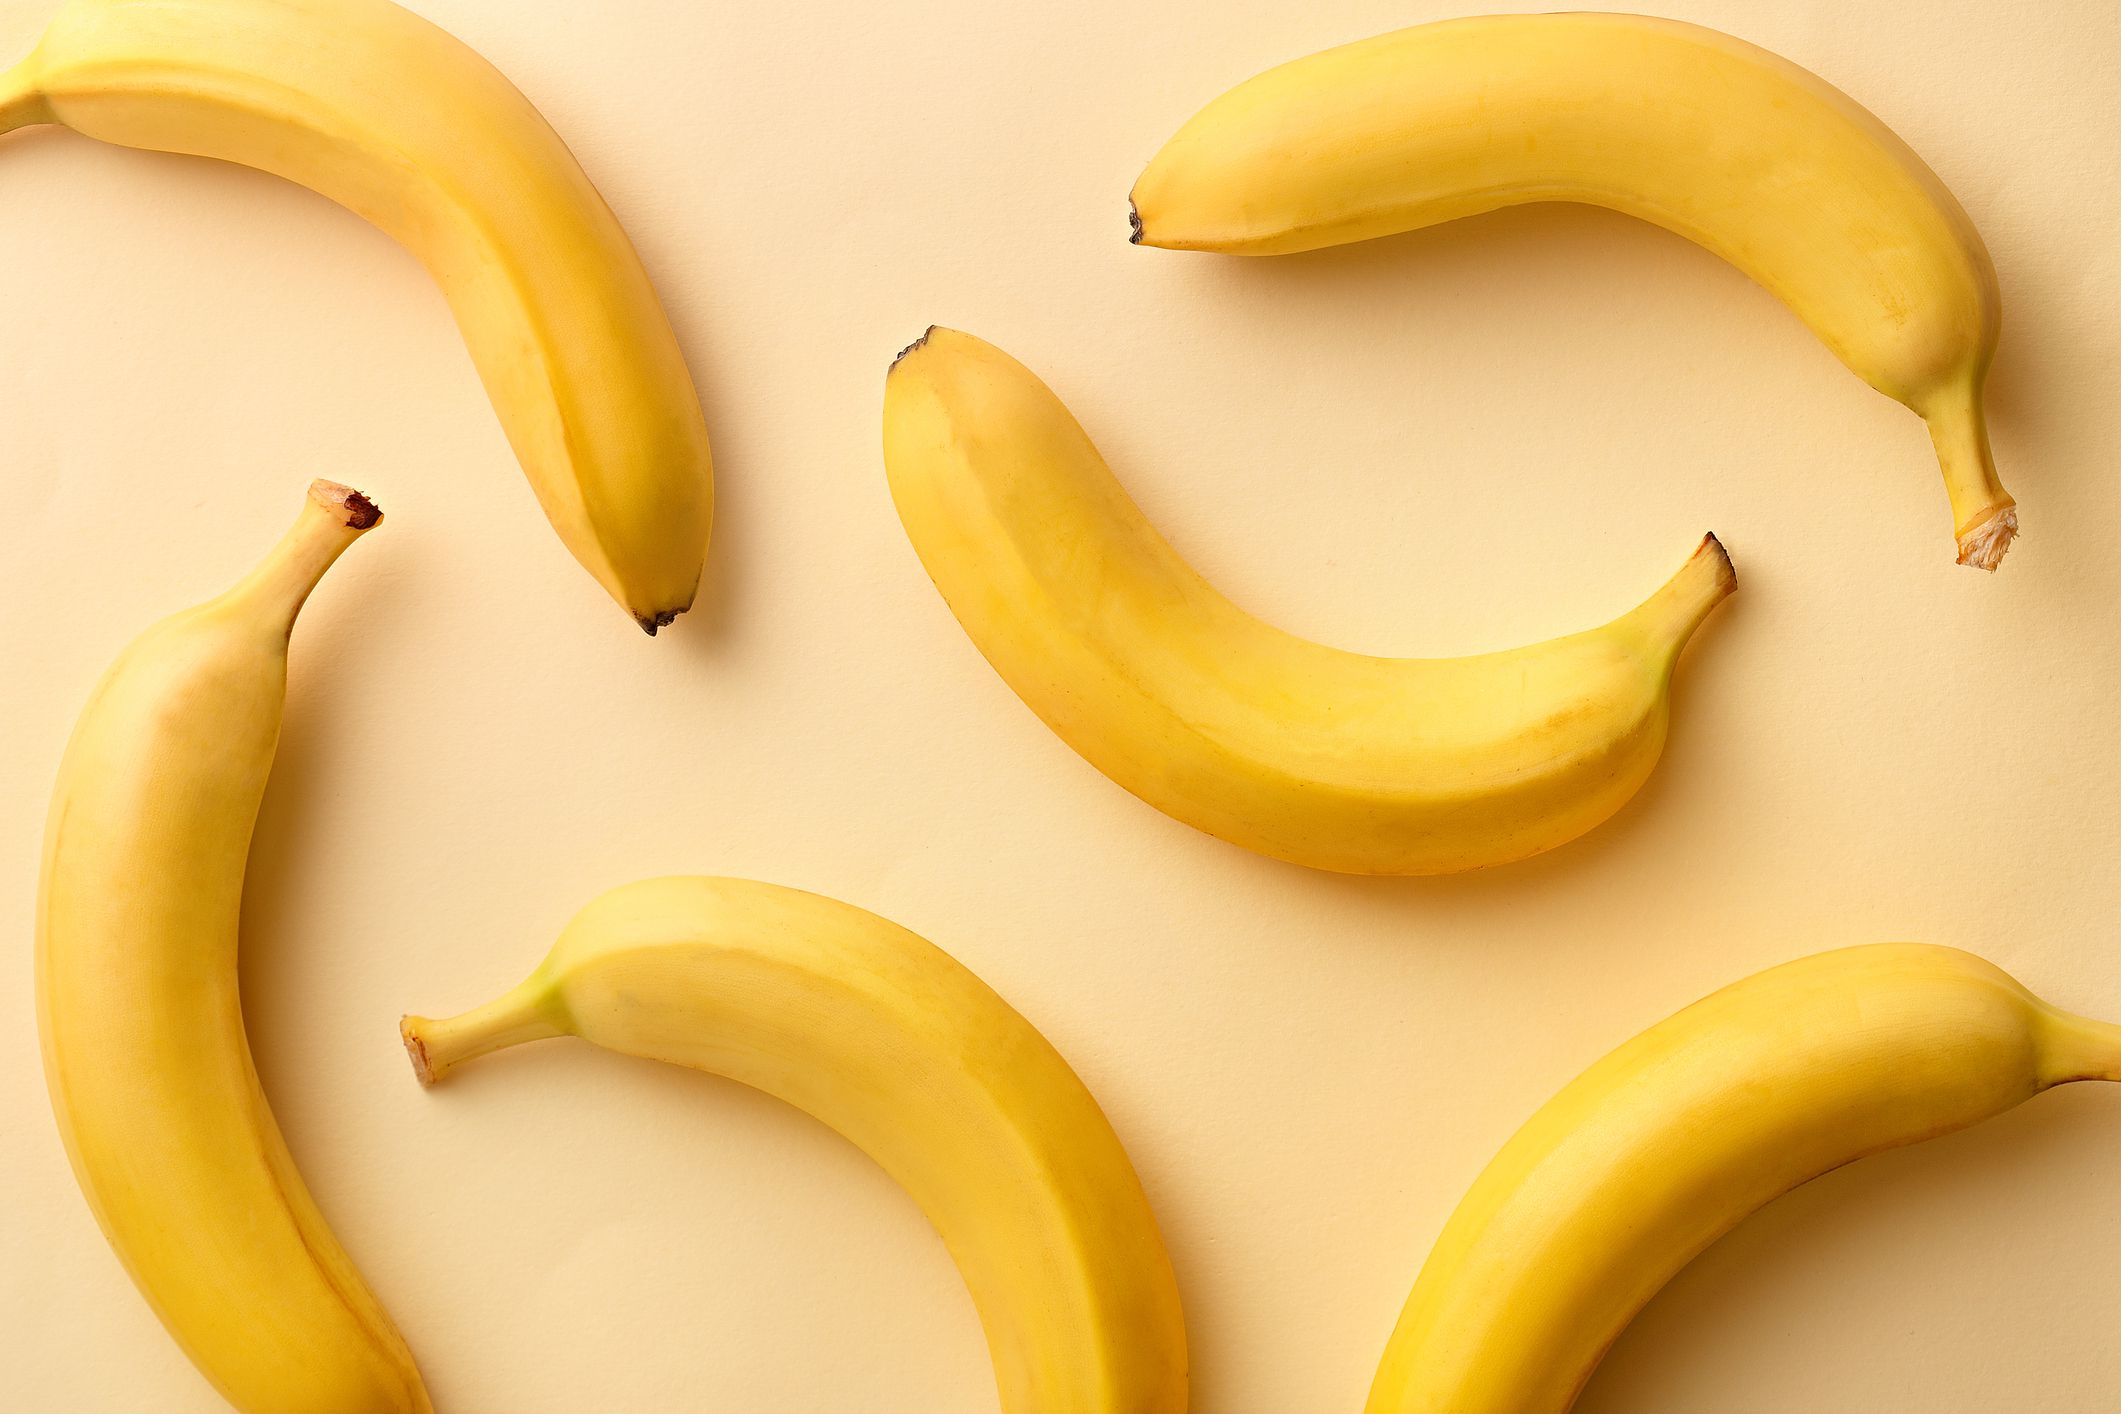 People are angry about this environmentally damaging banana packaging